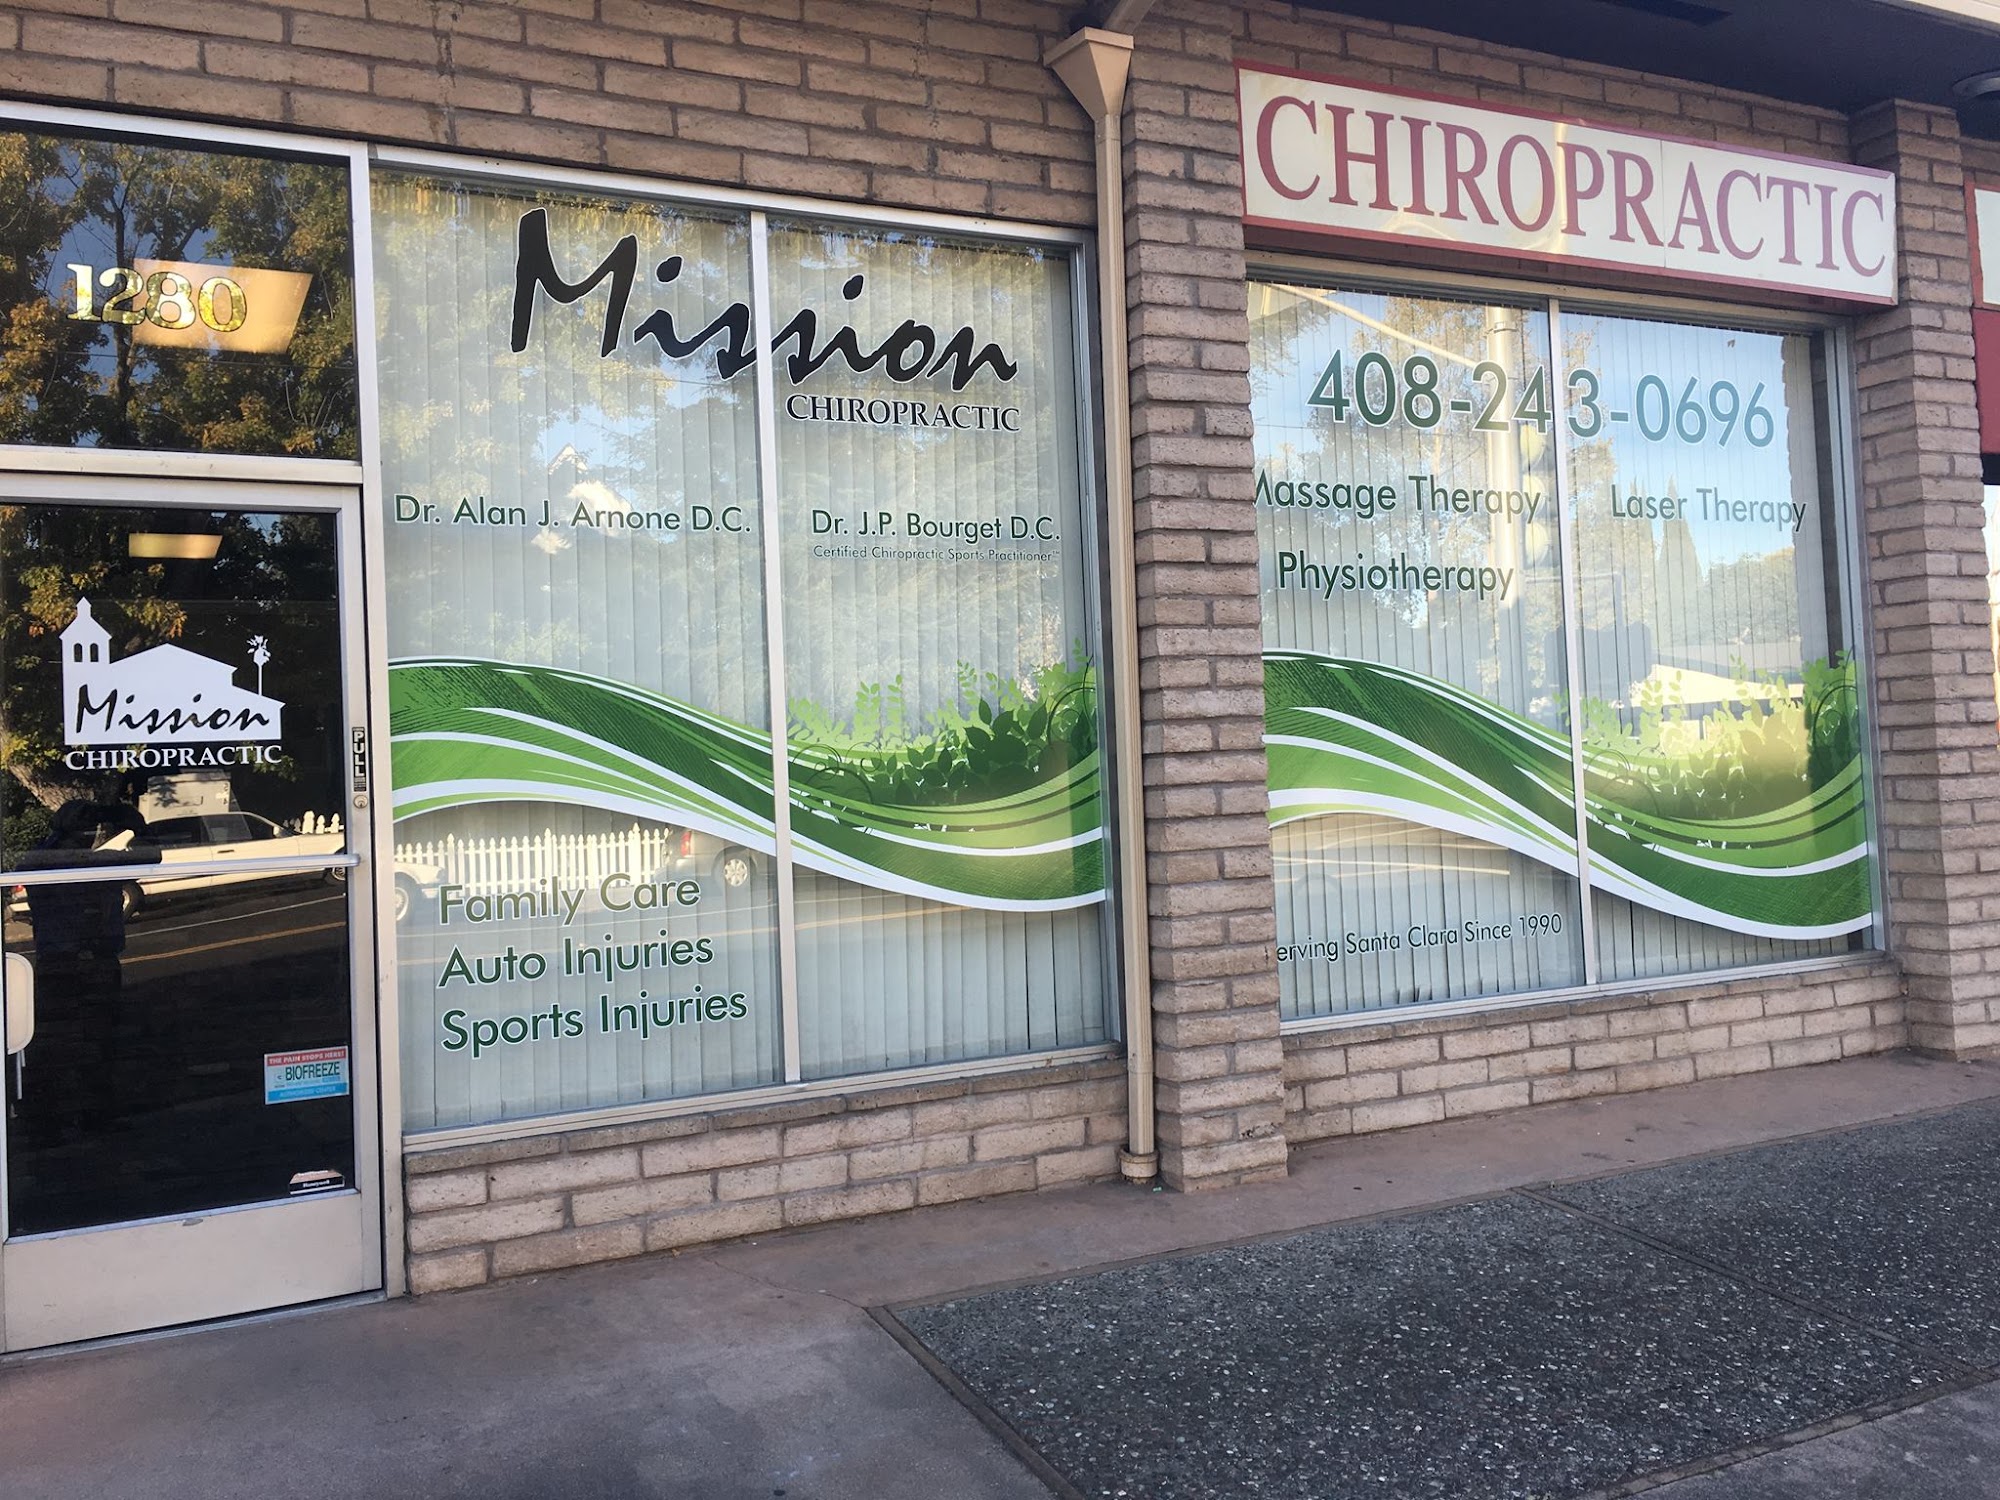 Mission Chiropractic